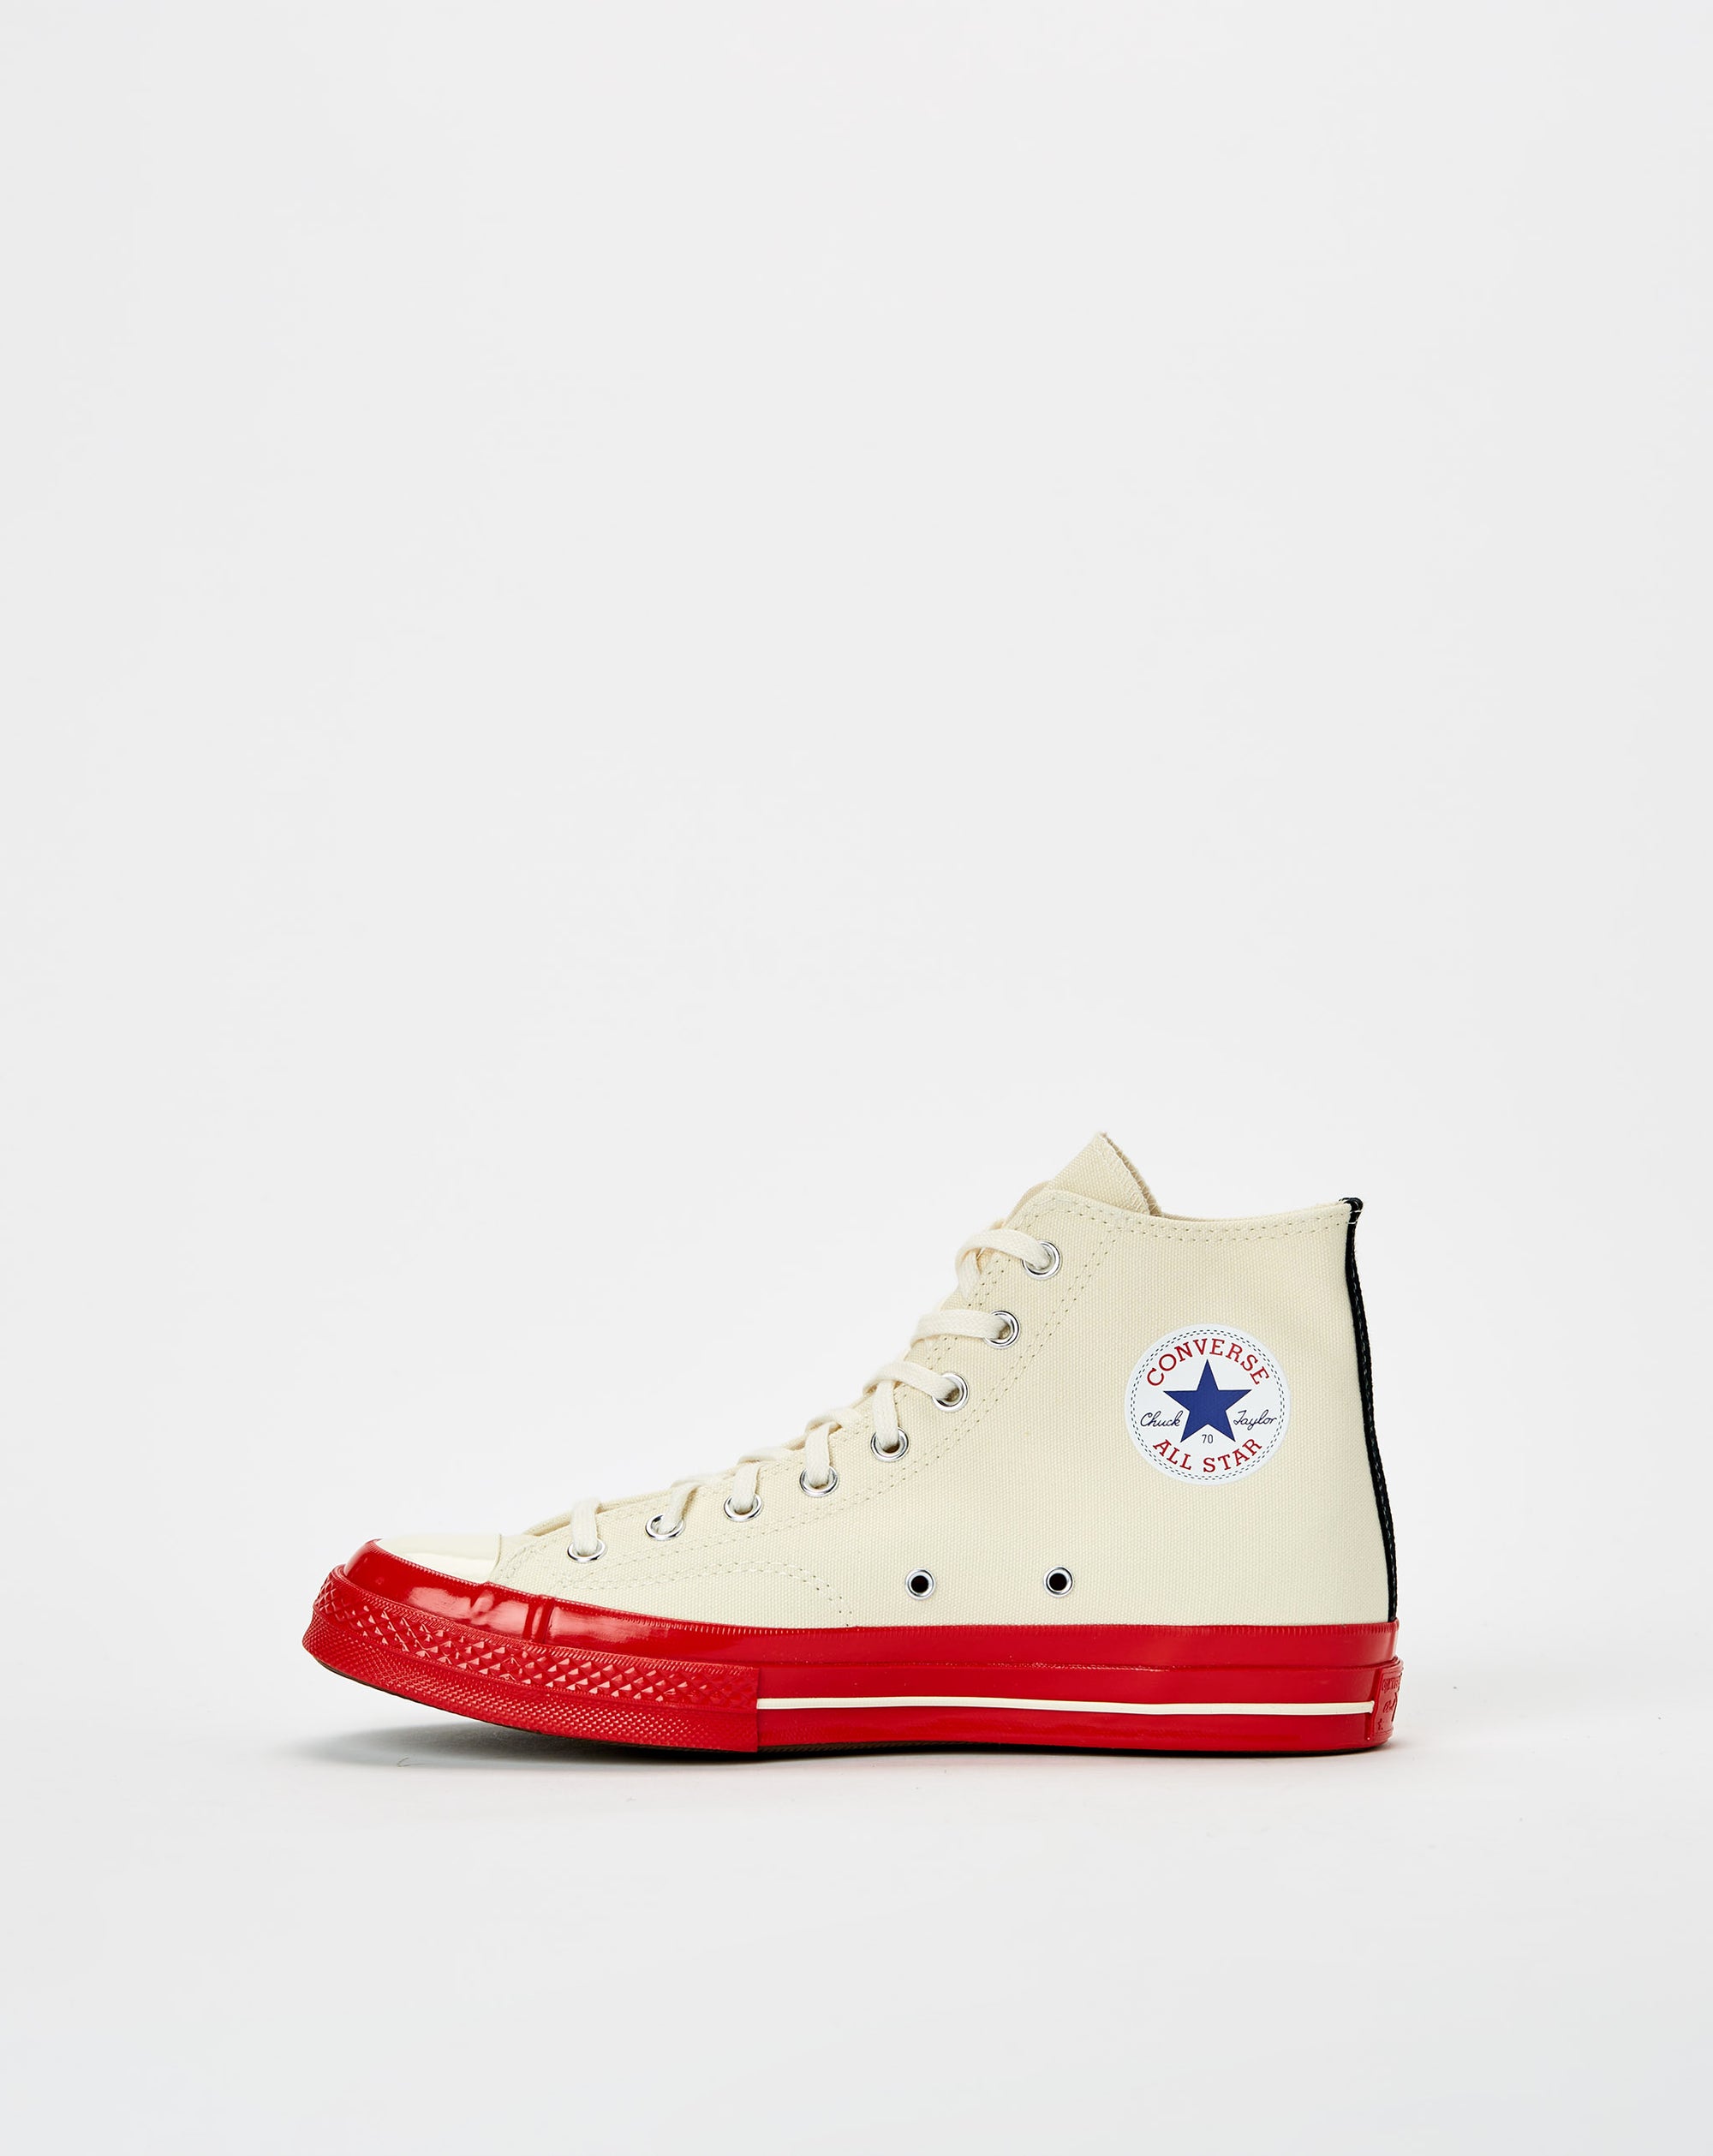 Converse Comme des Garcons Play x Red Sole High Top - Rule of Next Footwear